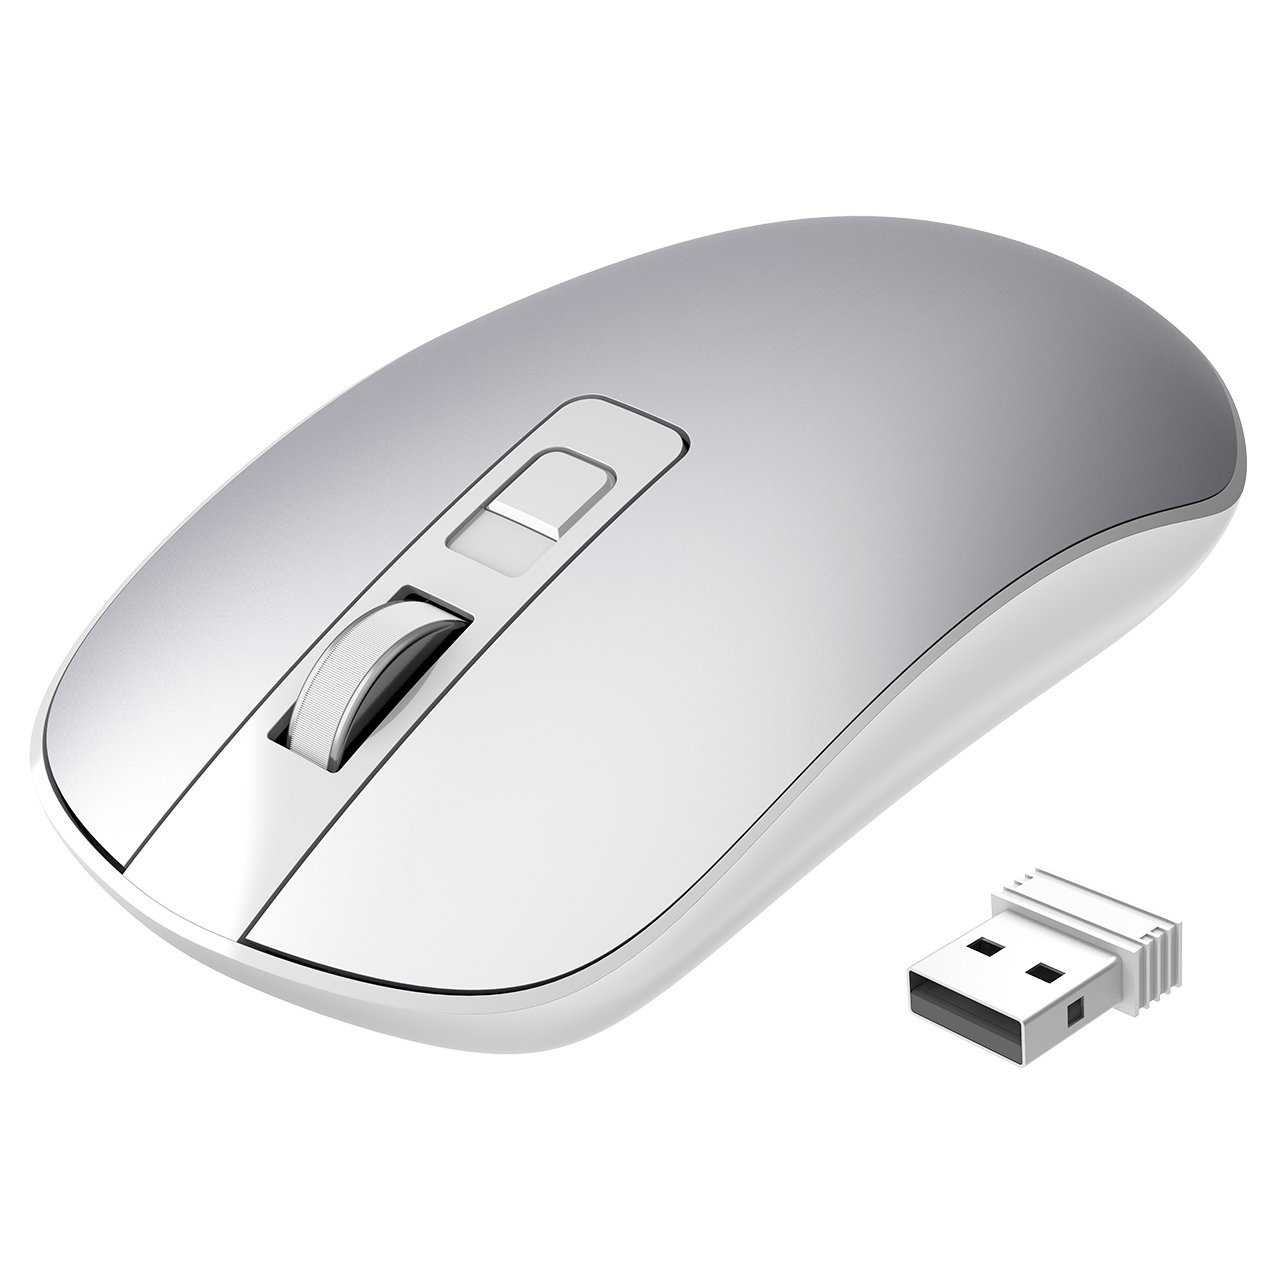 Asus wt415 optical wireless mouse red usb (красный)